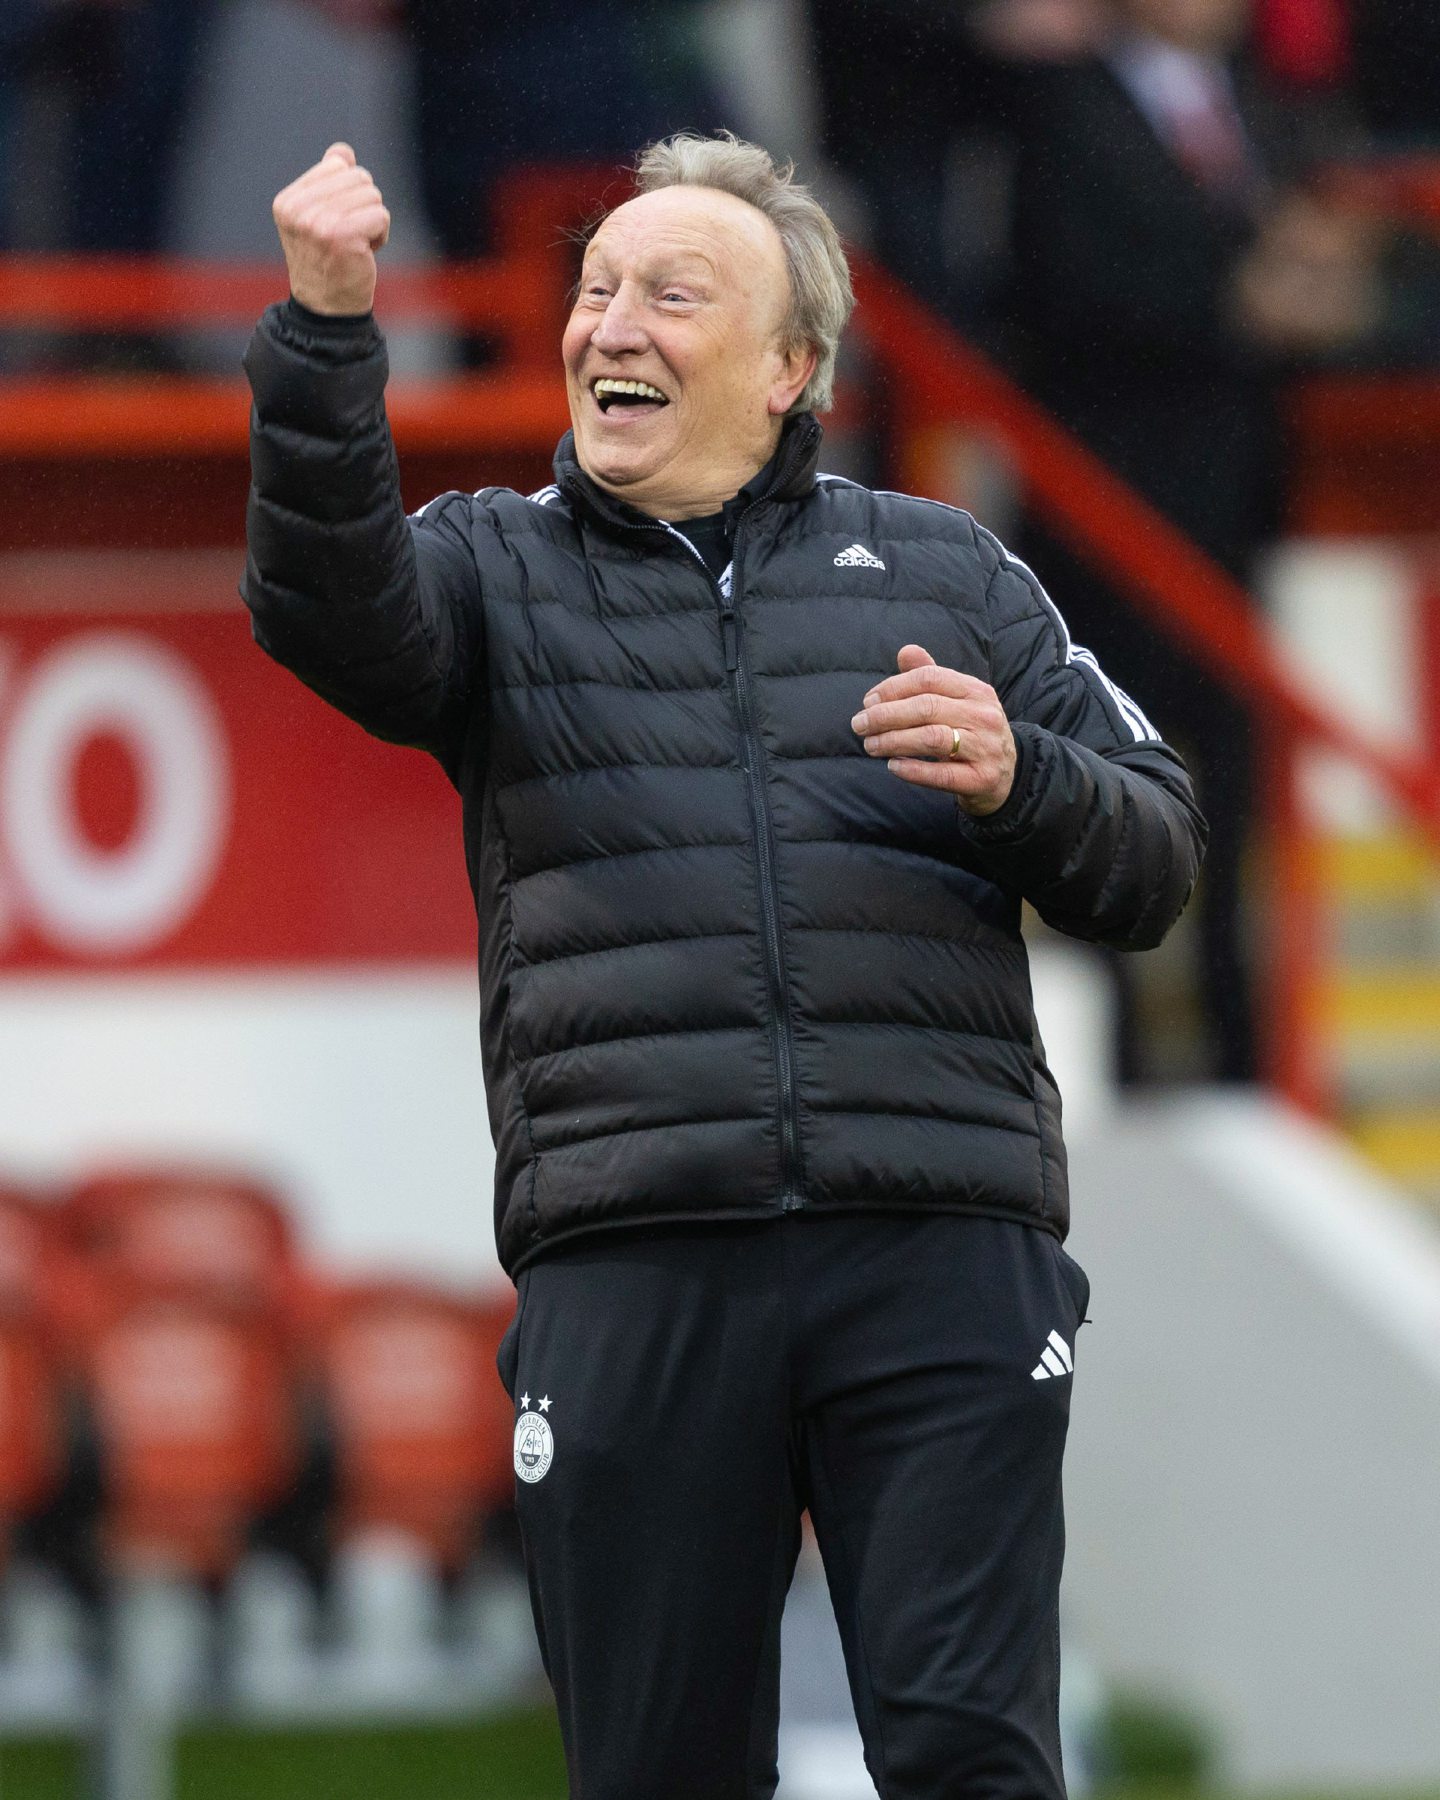 Neil Warnock celebrates at full time after Aberdeen beat Kilmarnock in the Scottish Cup quarter-final. Image: SNS 